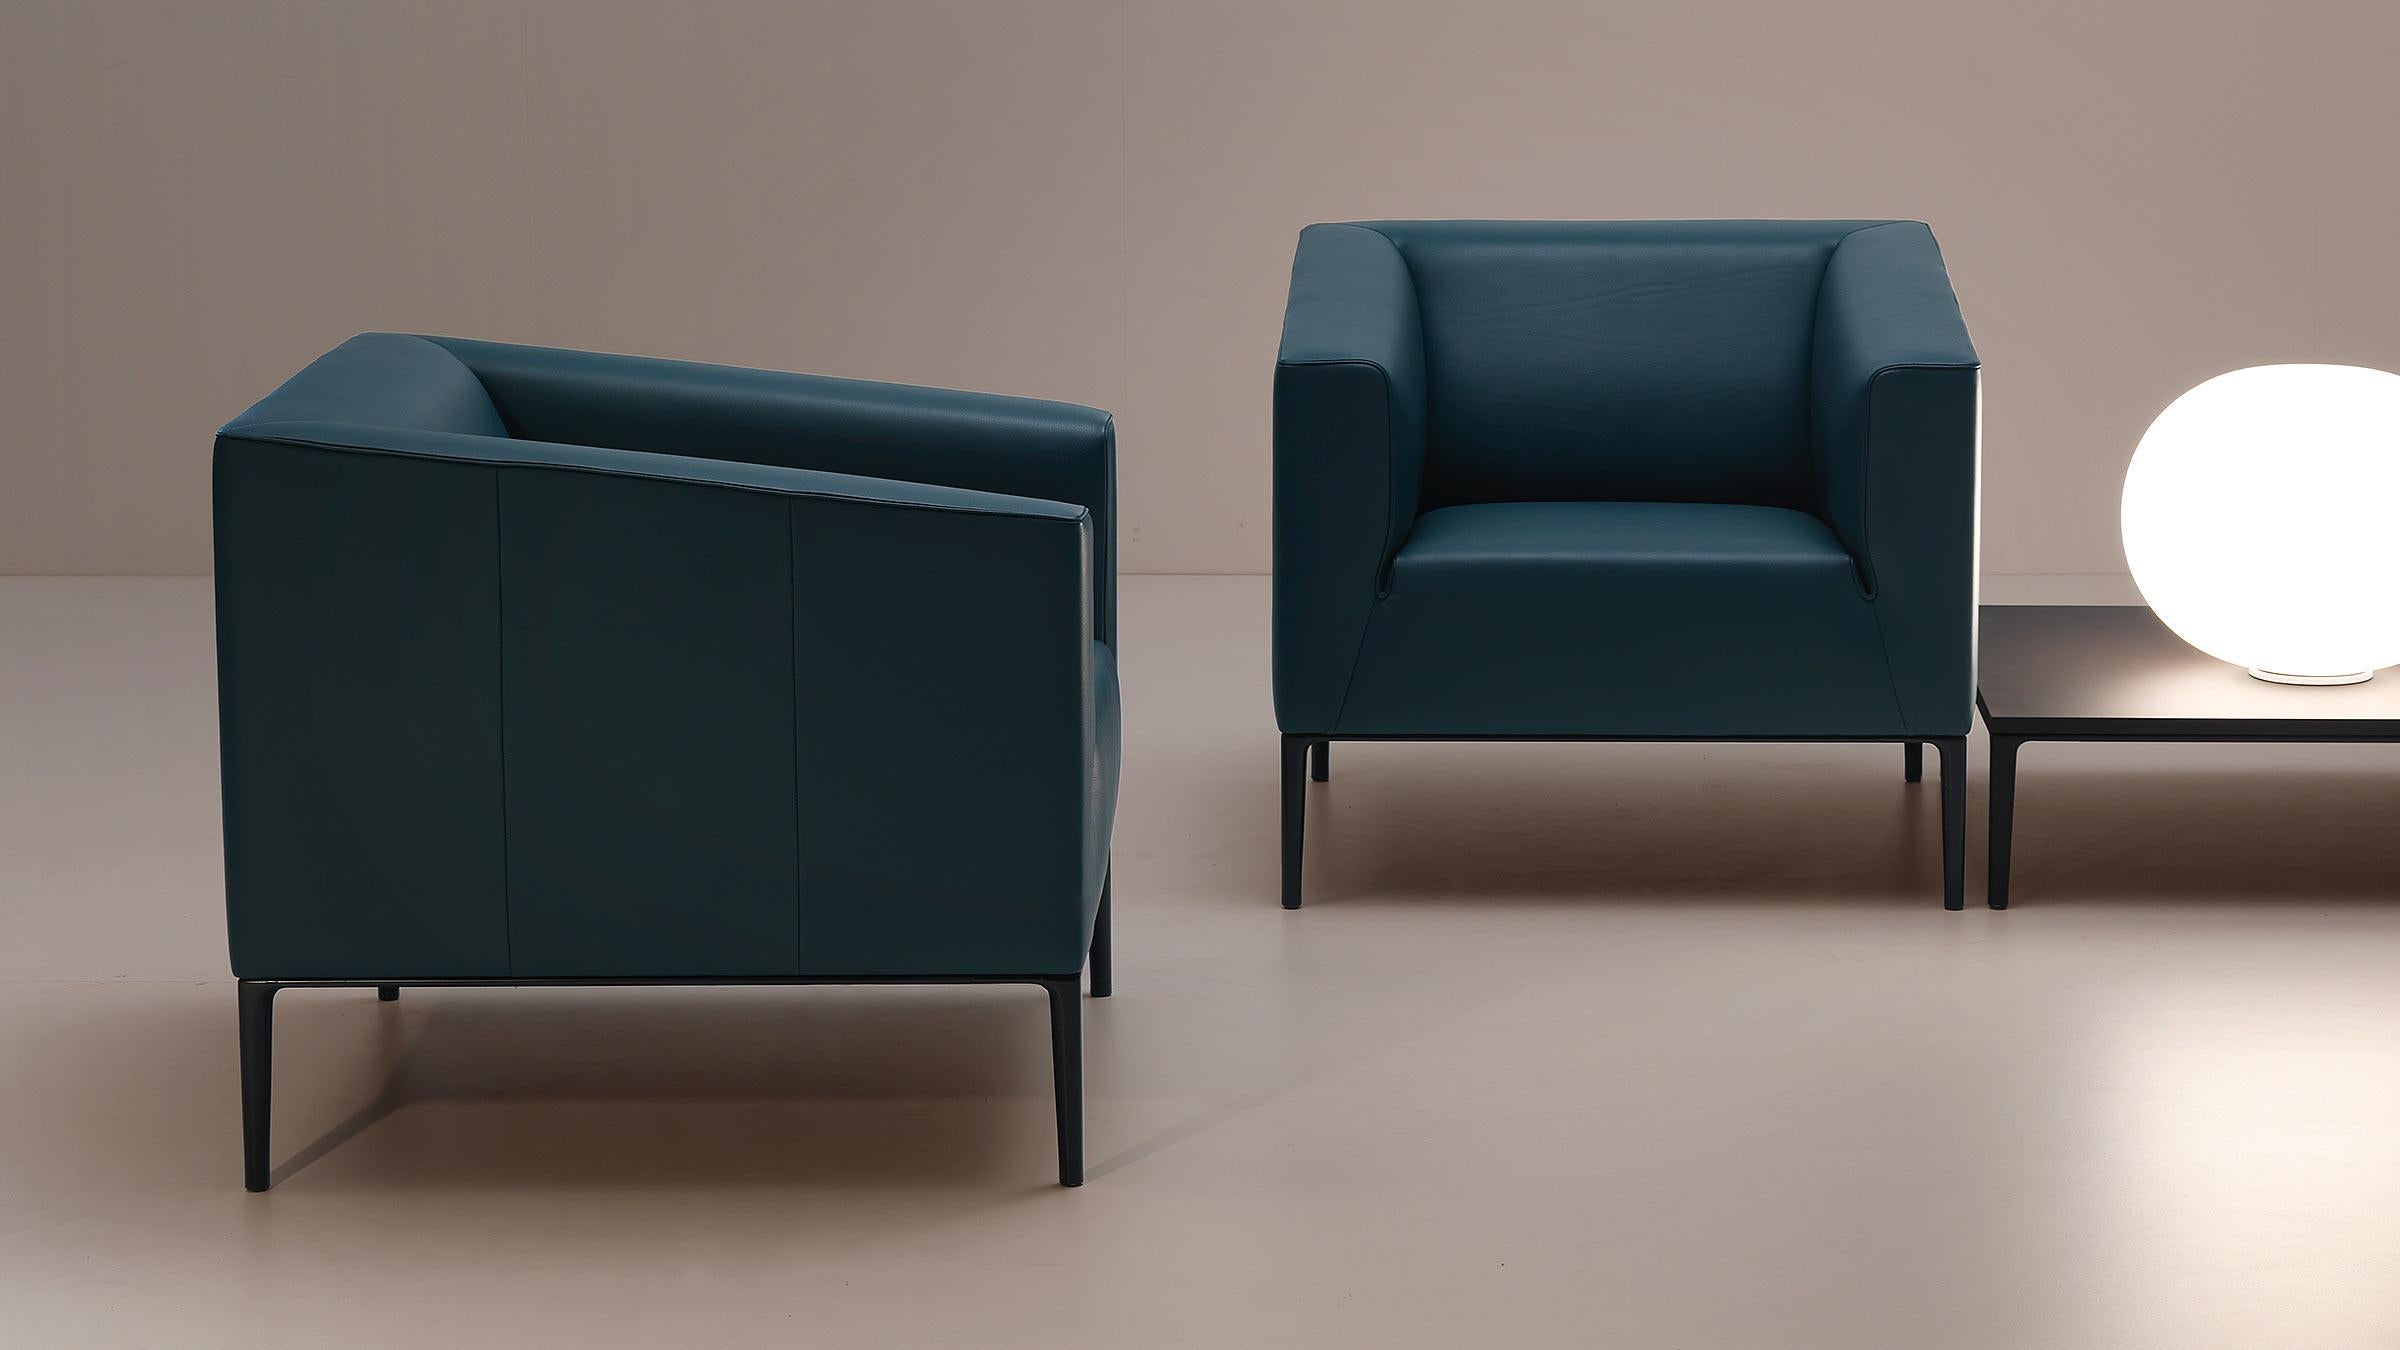 Its linear outer contour and round inner shape make the DS-161 a fine silhouette of comfort. The forward sloping armrests let the arms rest enthroned, while the backrest embraces the body like an embrace. Those who let their hands glide over the